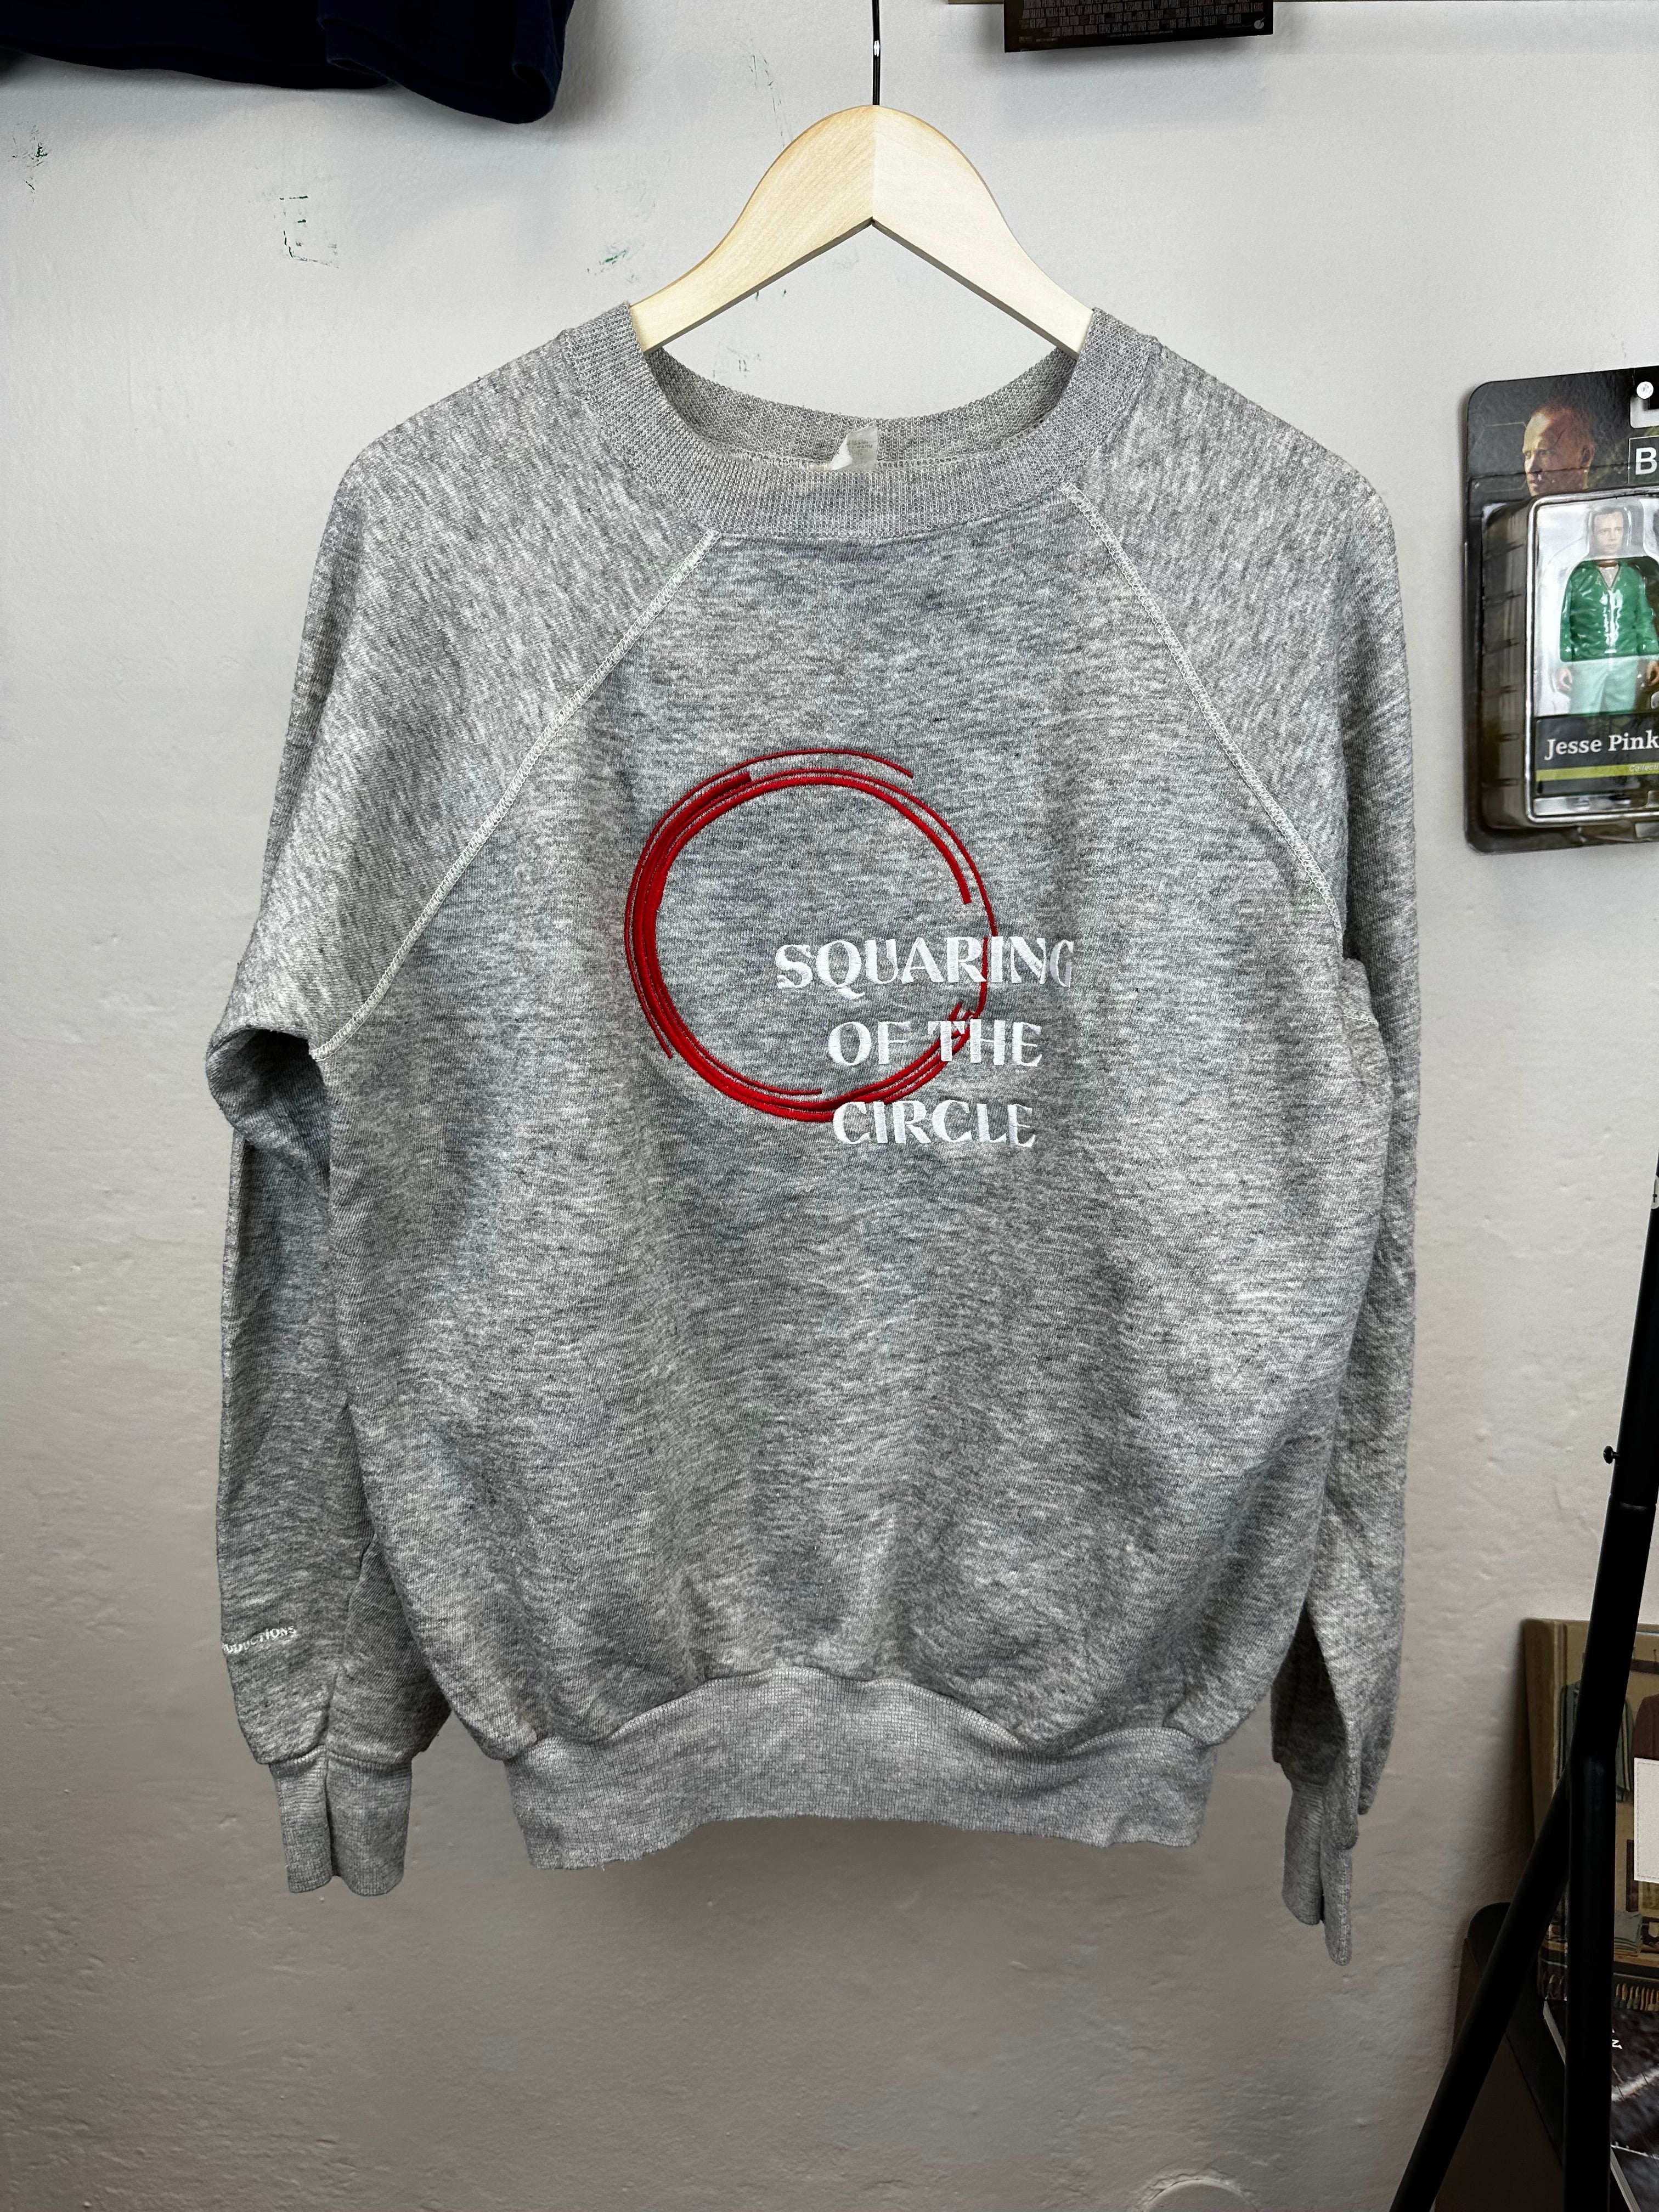 No Introductions - "Squaring of the Circle" crewneck - size M/L